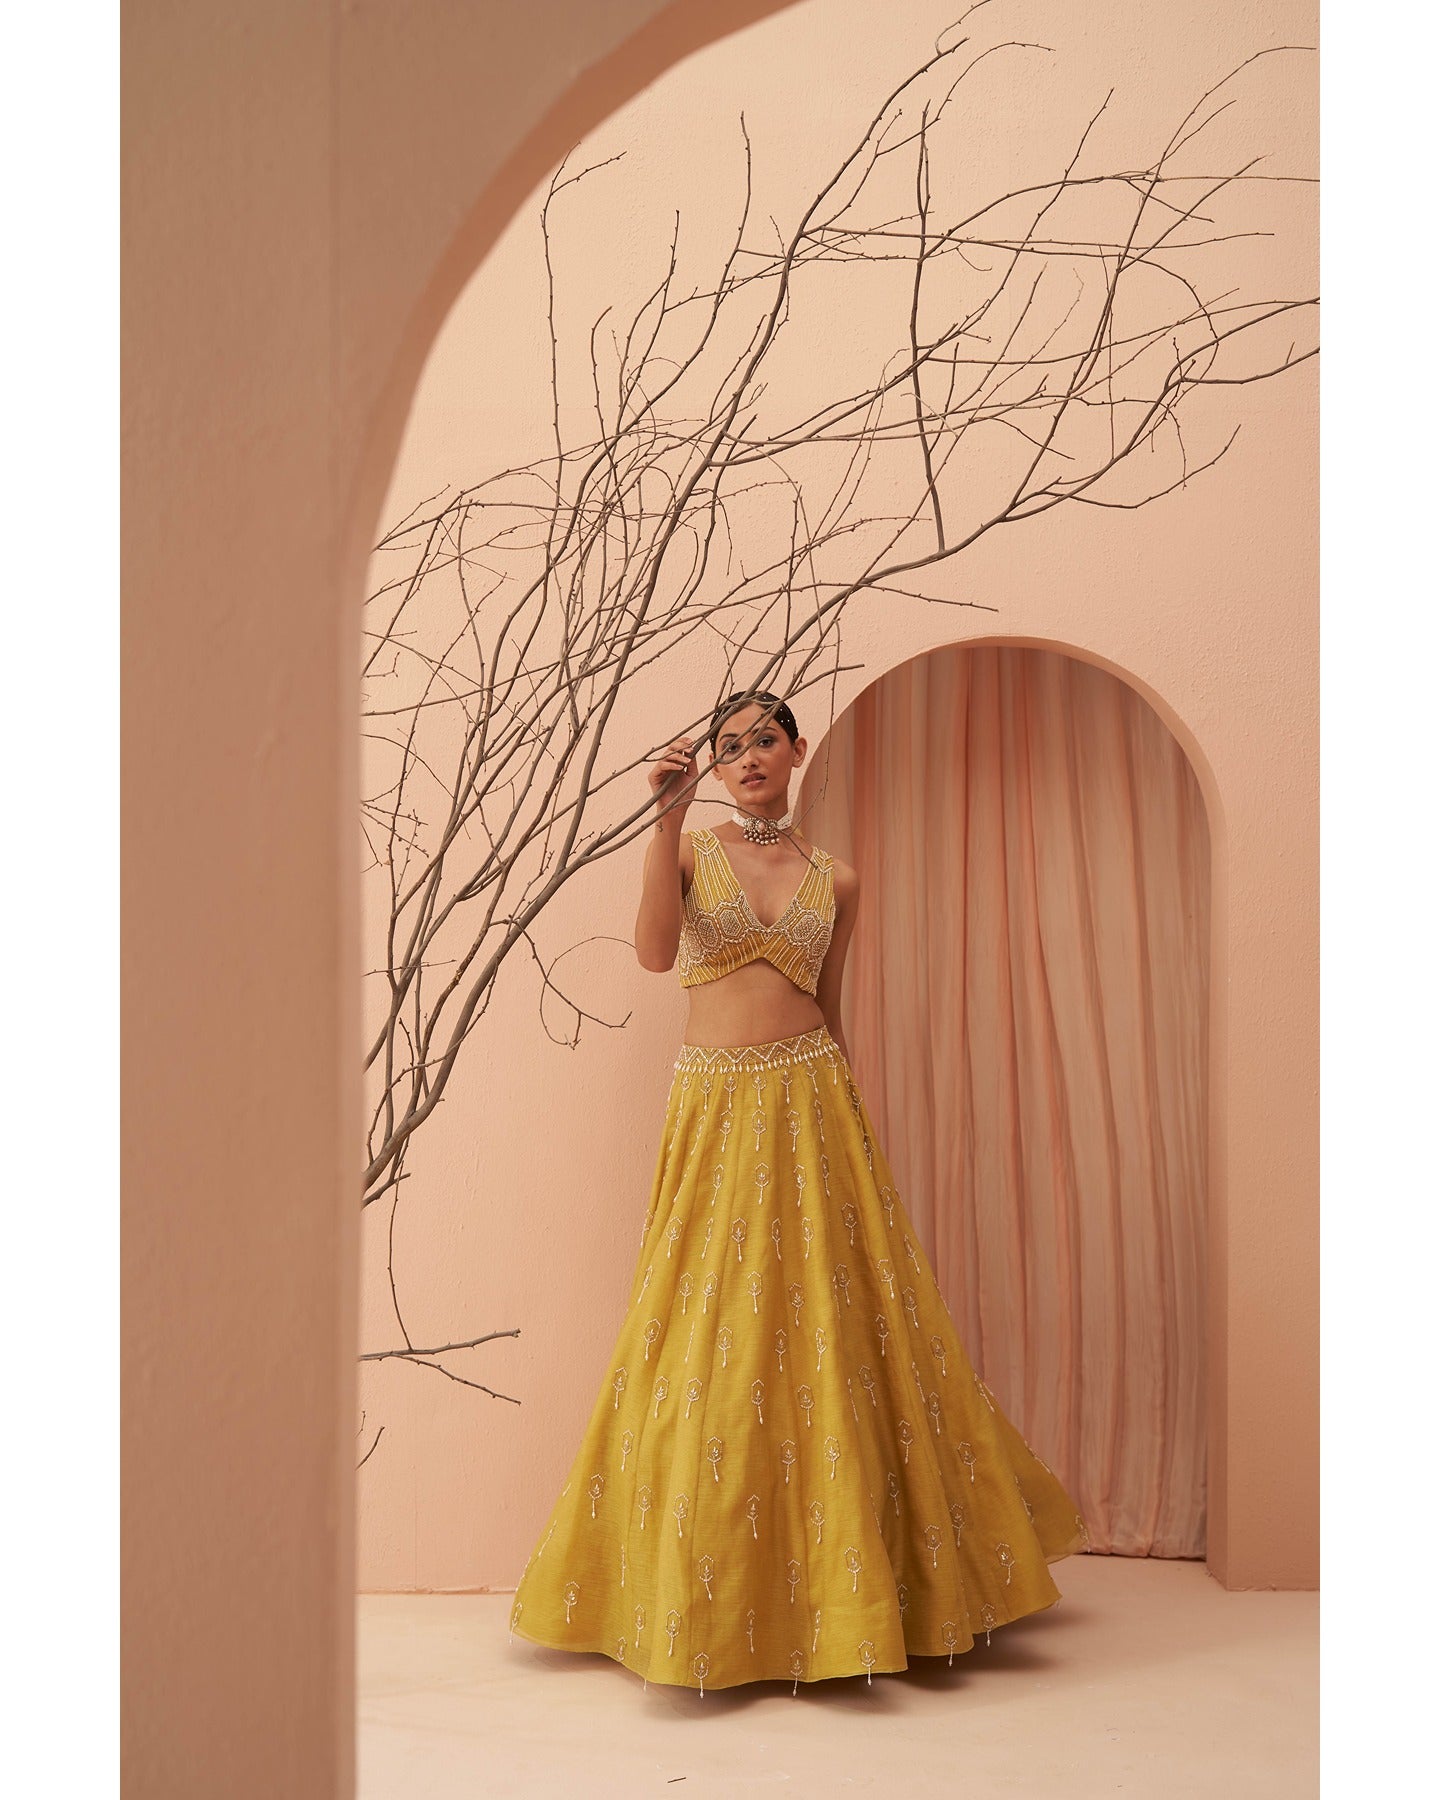 Sunny Splendor: Hand-embroidered grace on a radiant yellow lehenga, a canvas of timeless elegance.